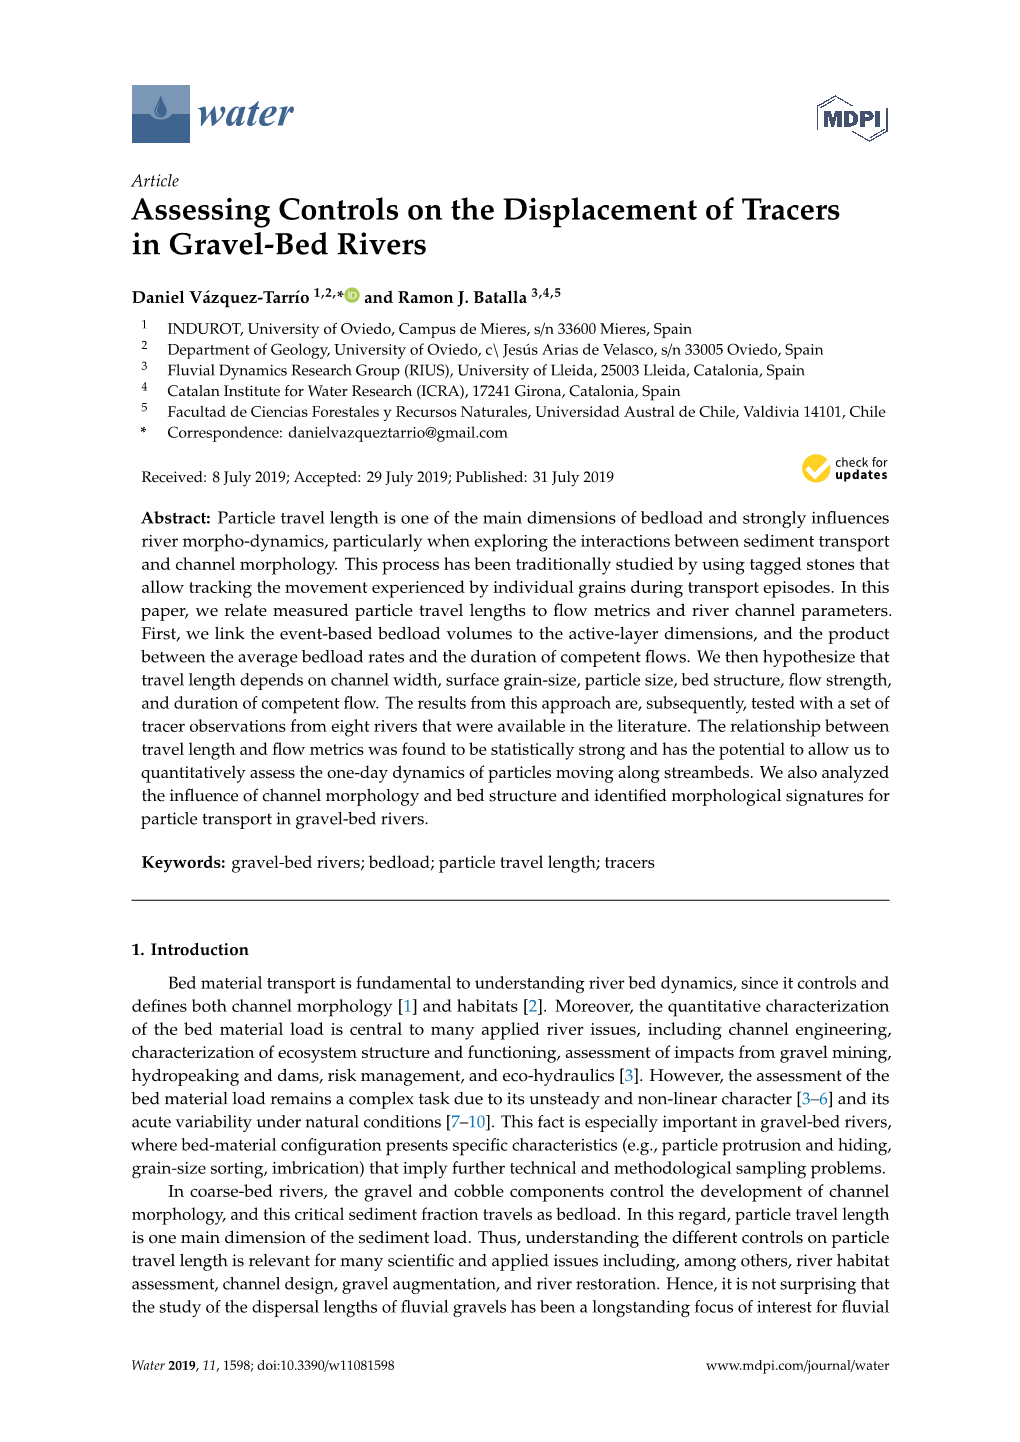 Assessing Controls on the Displacement of Tracers in Gravel-Bed Rivers